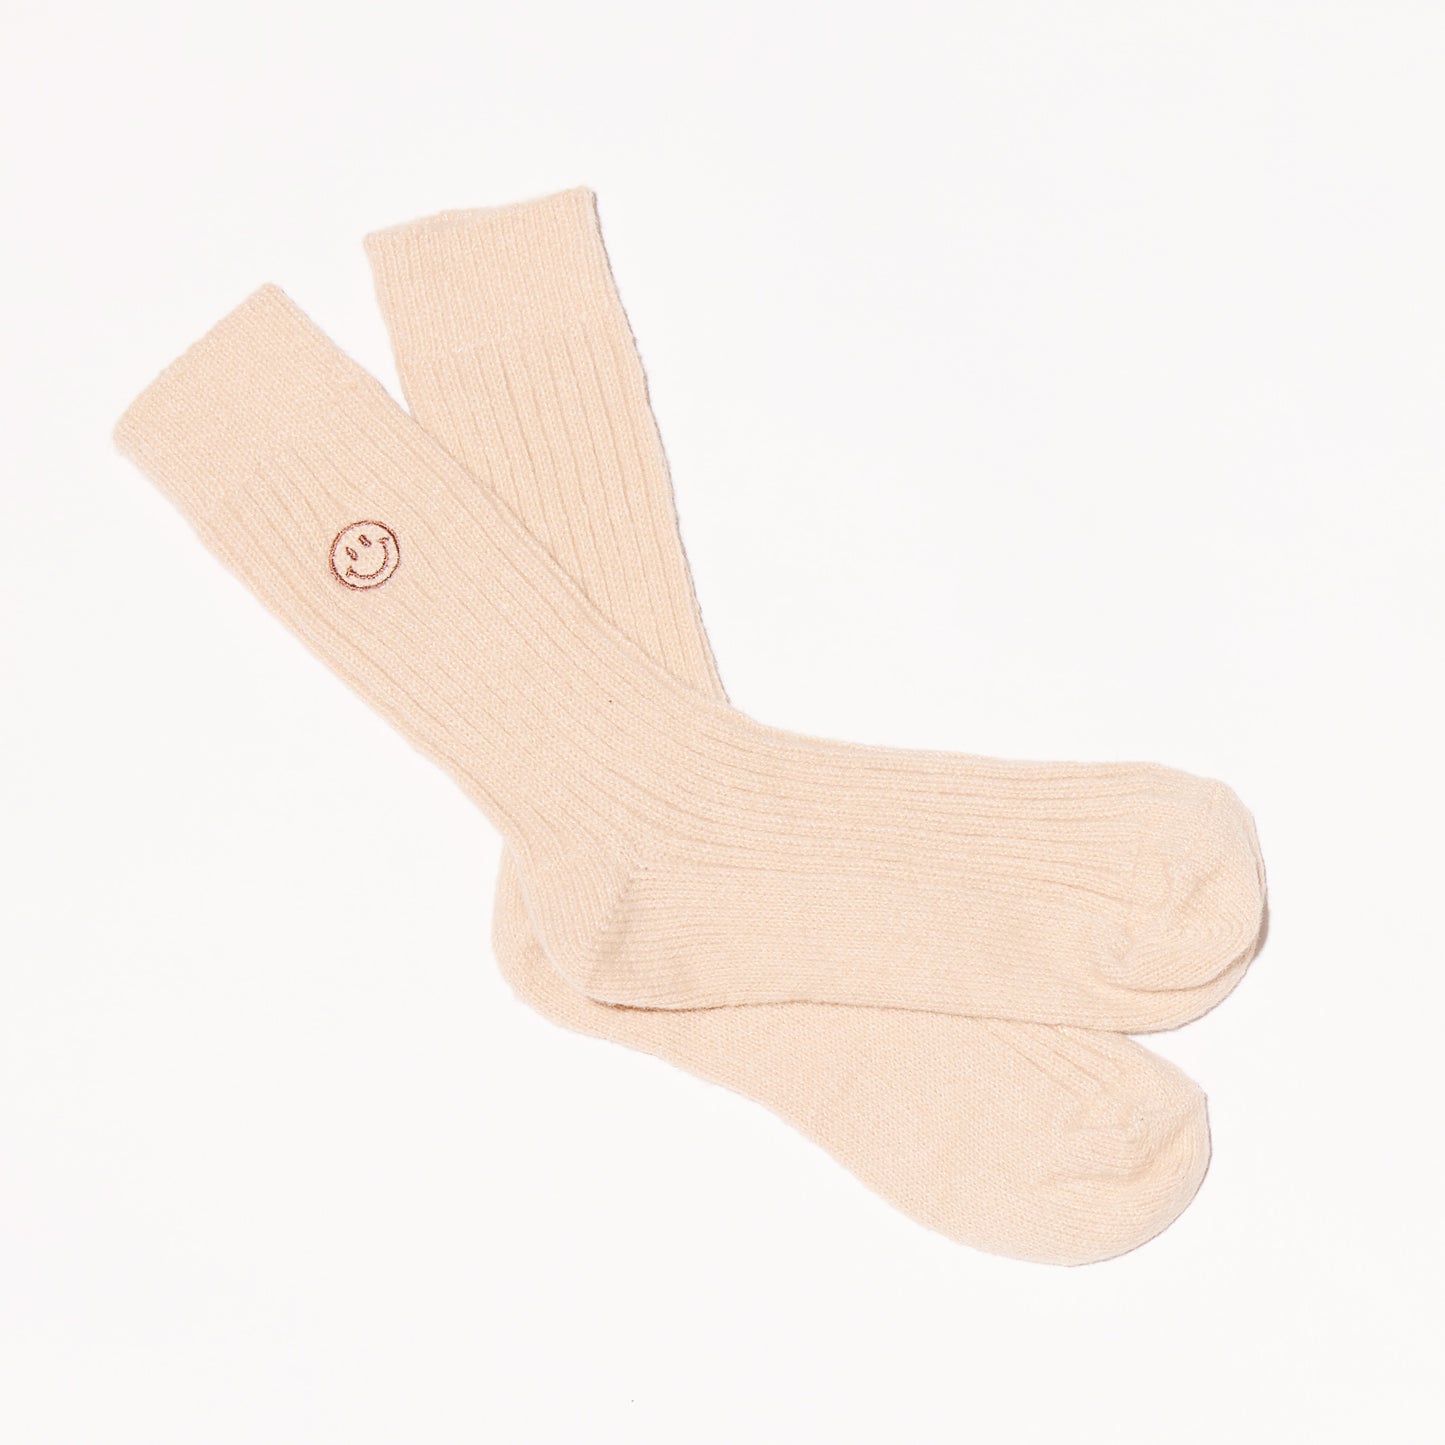 The Village Sock - Adult One Size